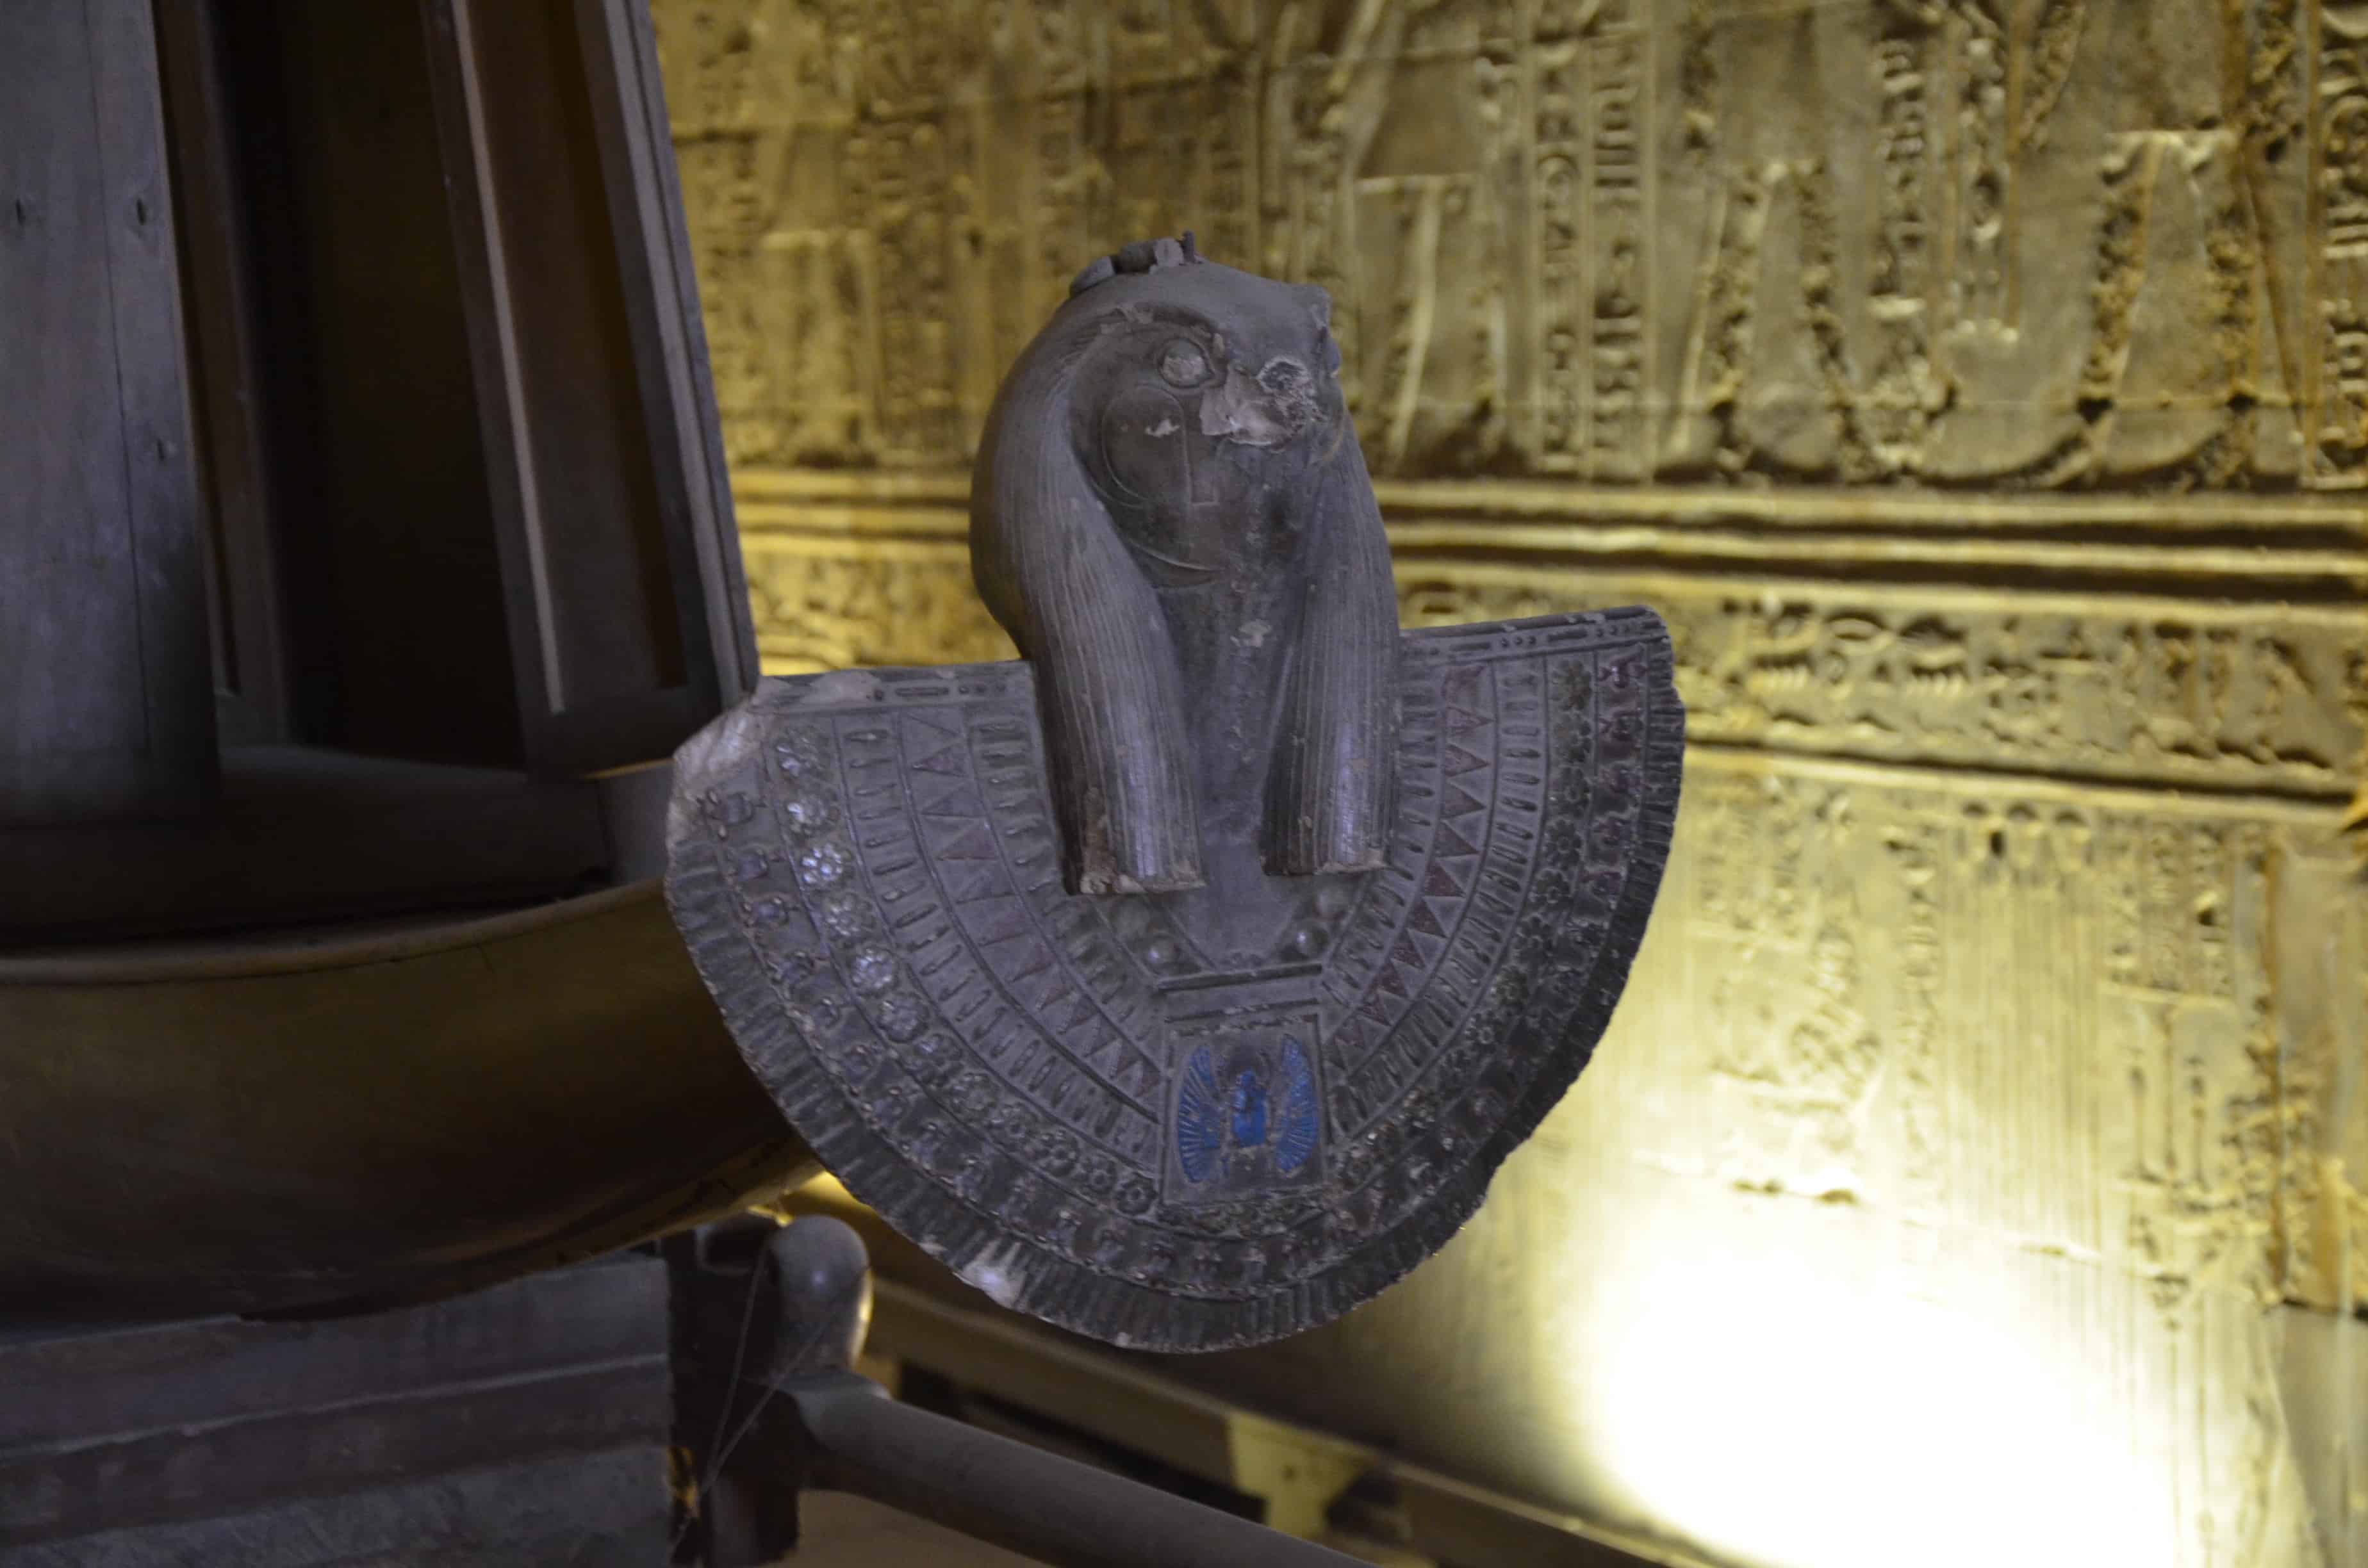 Holy of Holies at the Temple of Edfu, Egypt